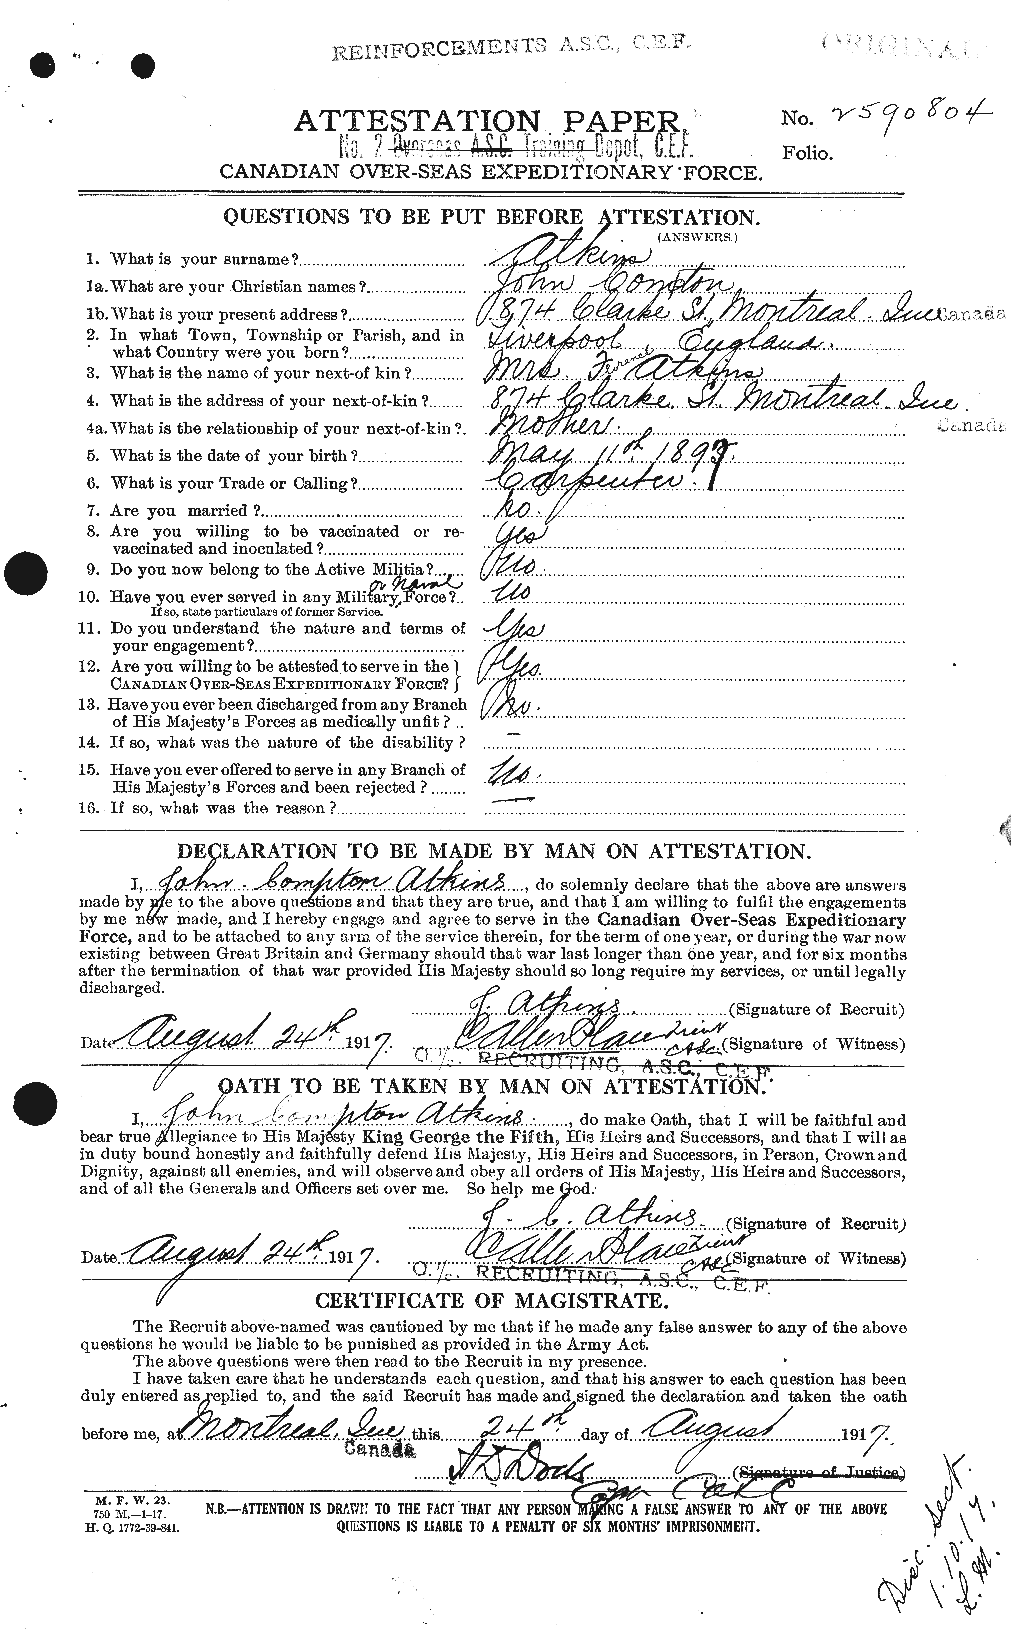 Personnel Records of the First World War - CEF 216823a